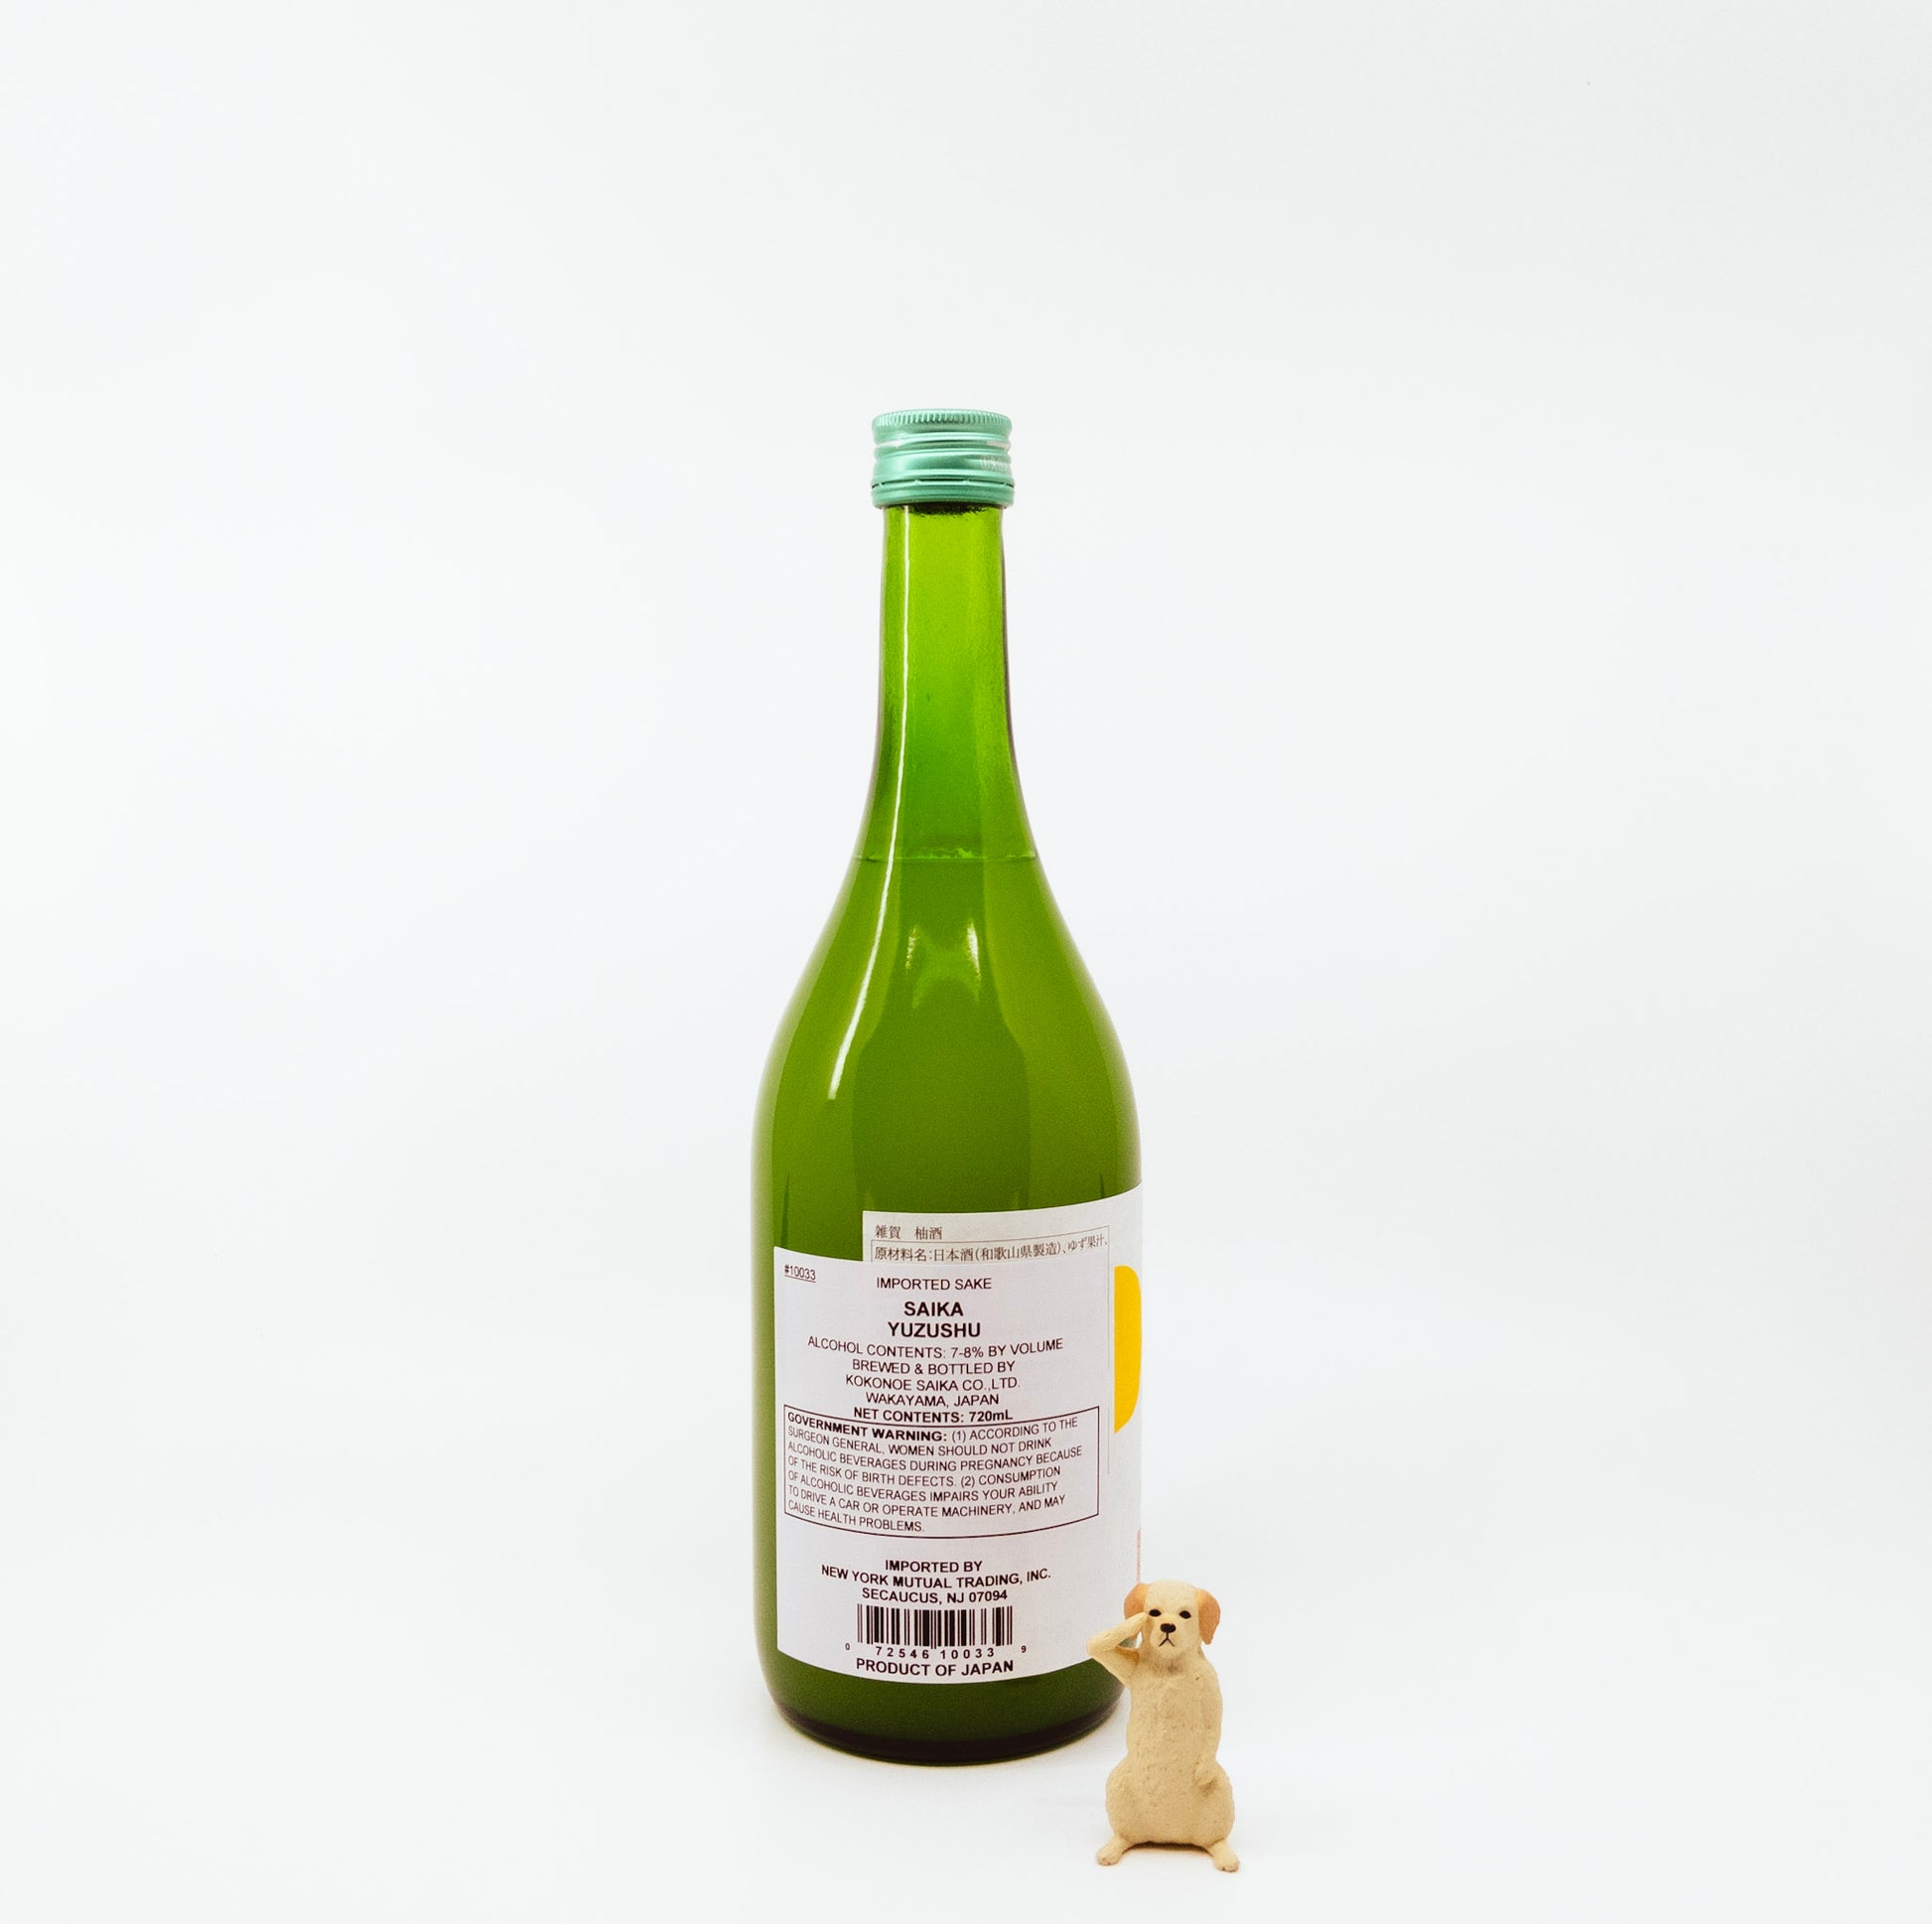 back of green glass bottle with yellow on white label next to dog figurine